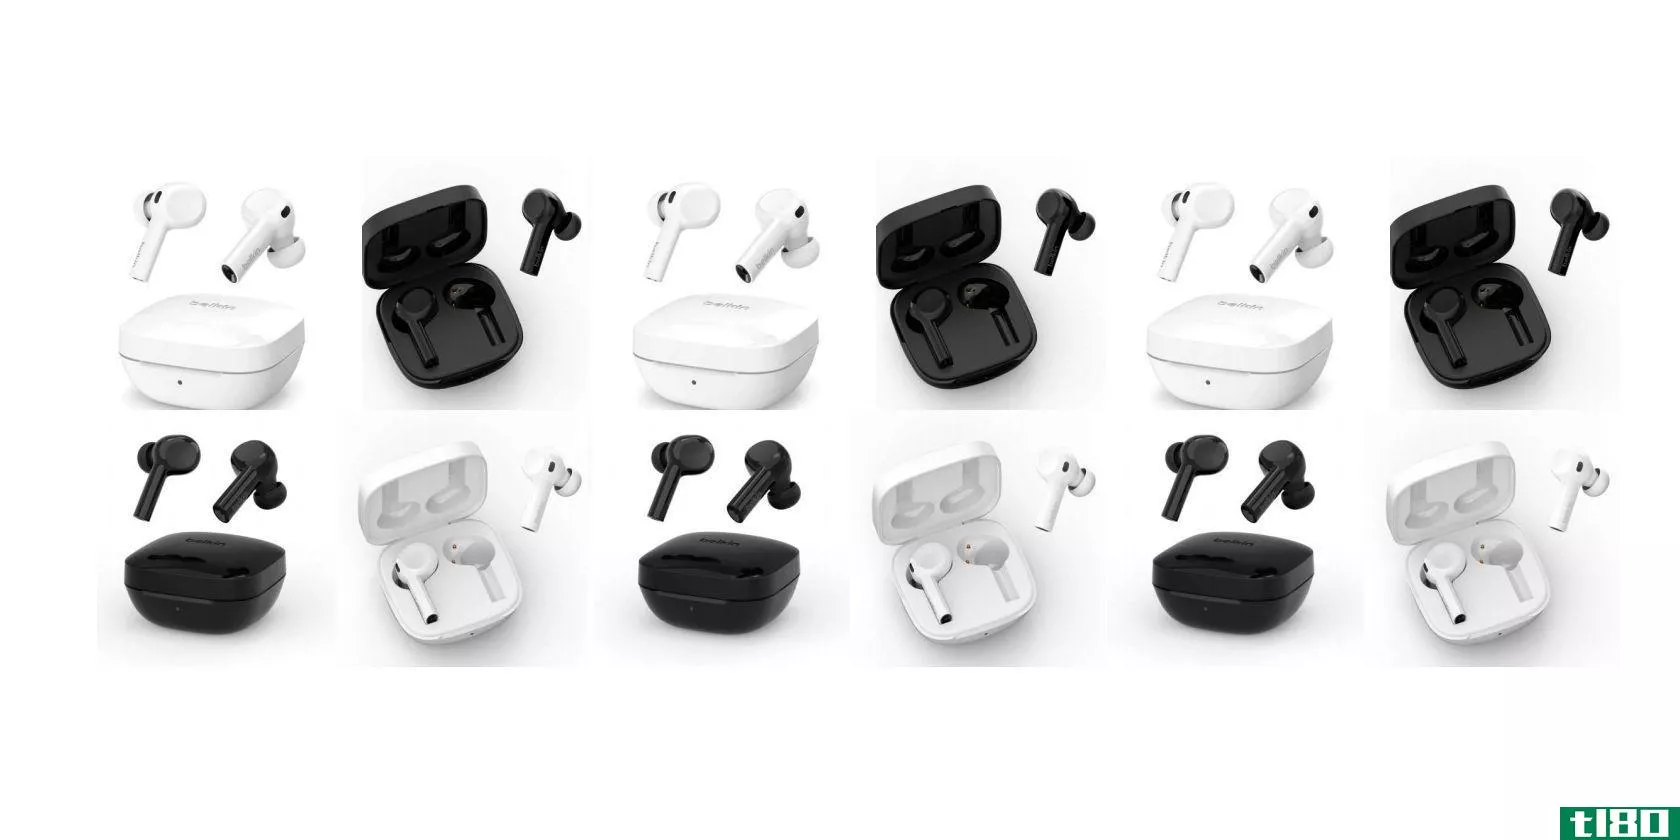 Belkin Soundform Freedom True Wireless Earbuds in black and white with cases.